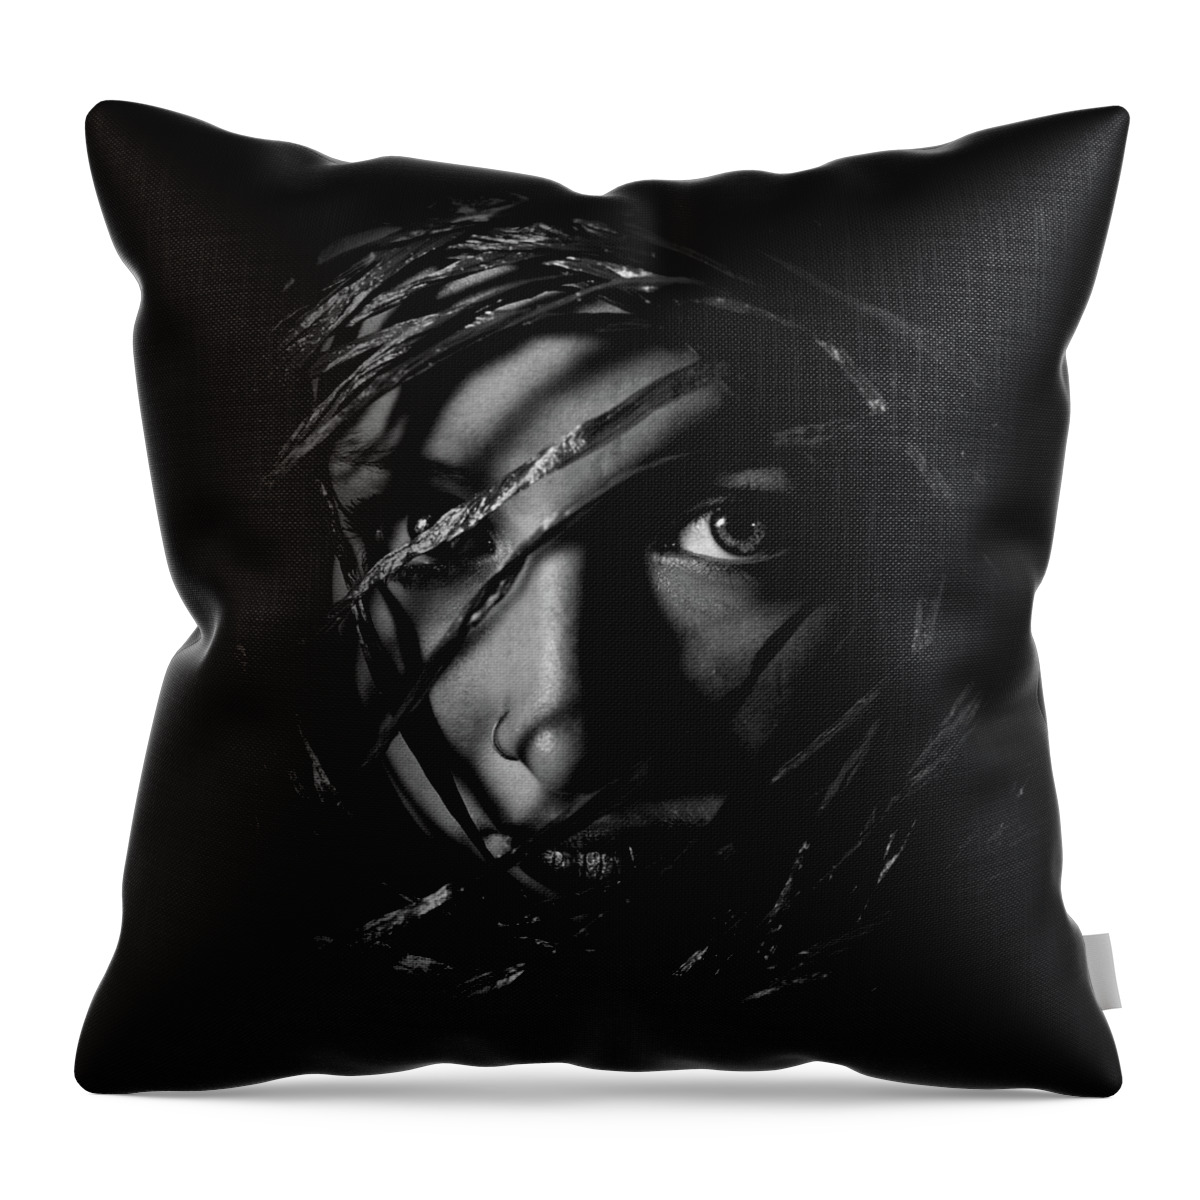 People Throw Pillow featuring the photograph Self Portrait Of Girl by Portrait, Emotion, People, Art,